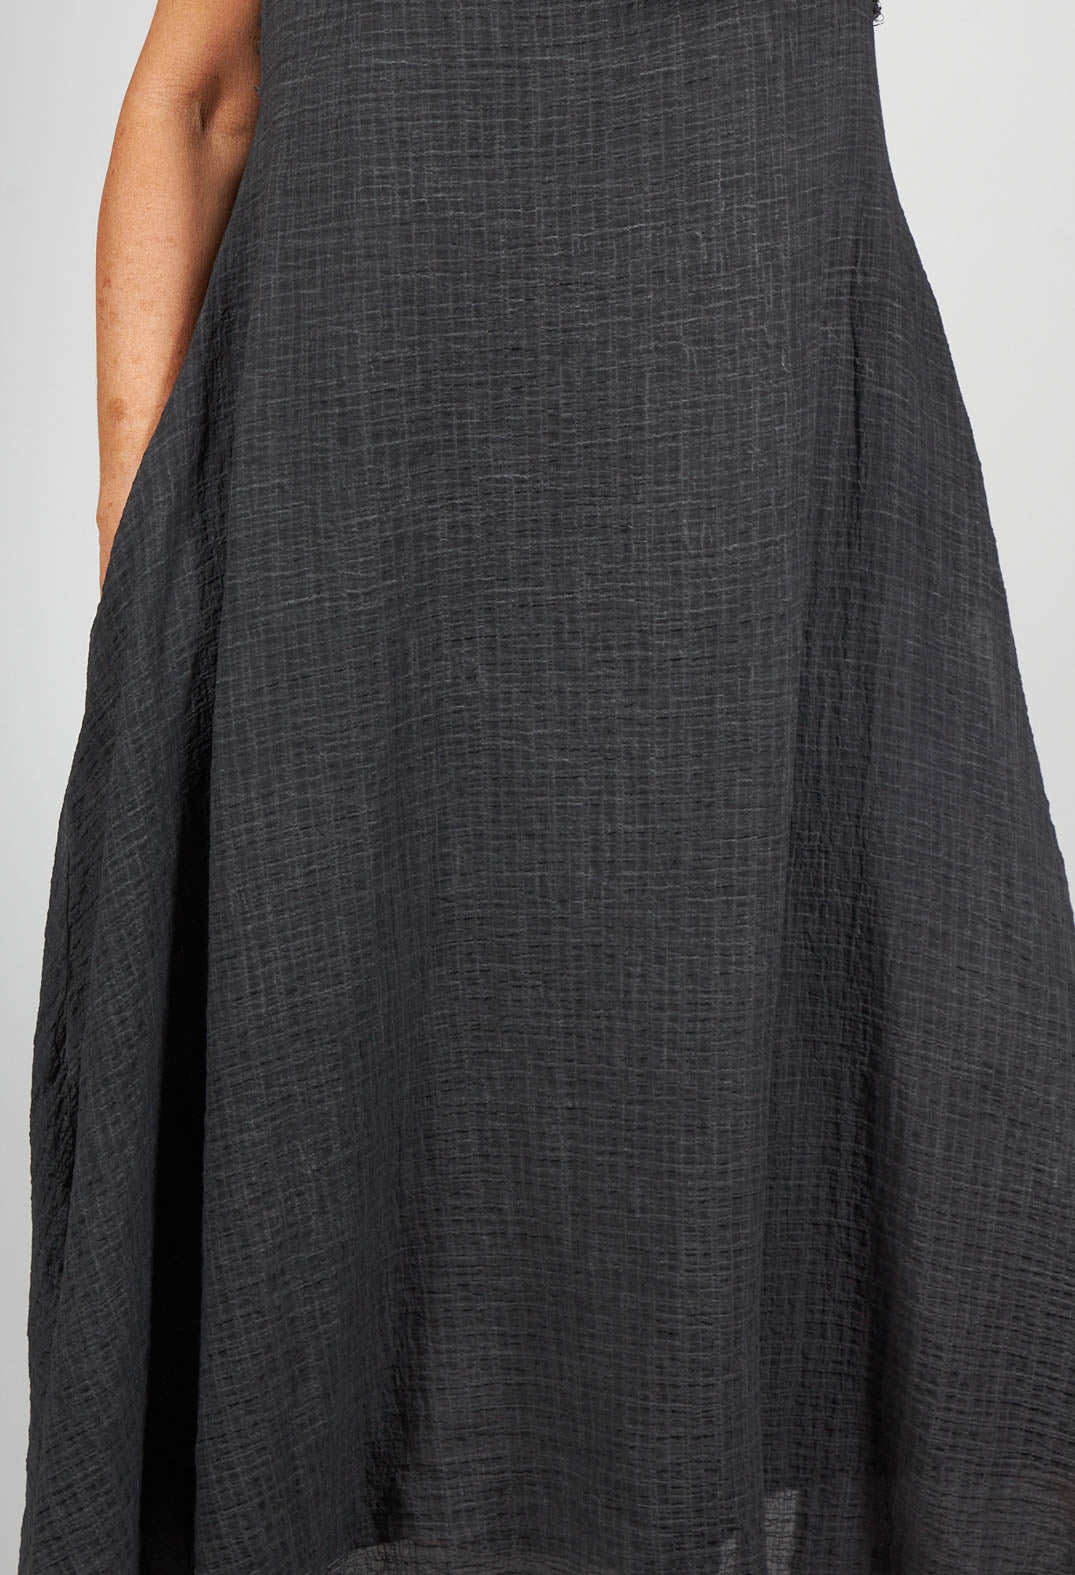 Sleeveless Maxi A White Dress in Dyed Black